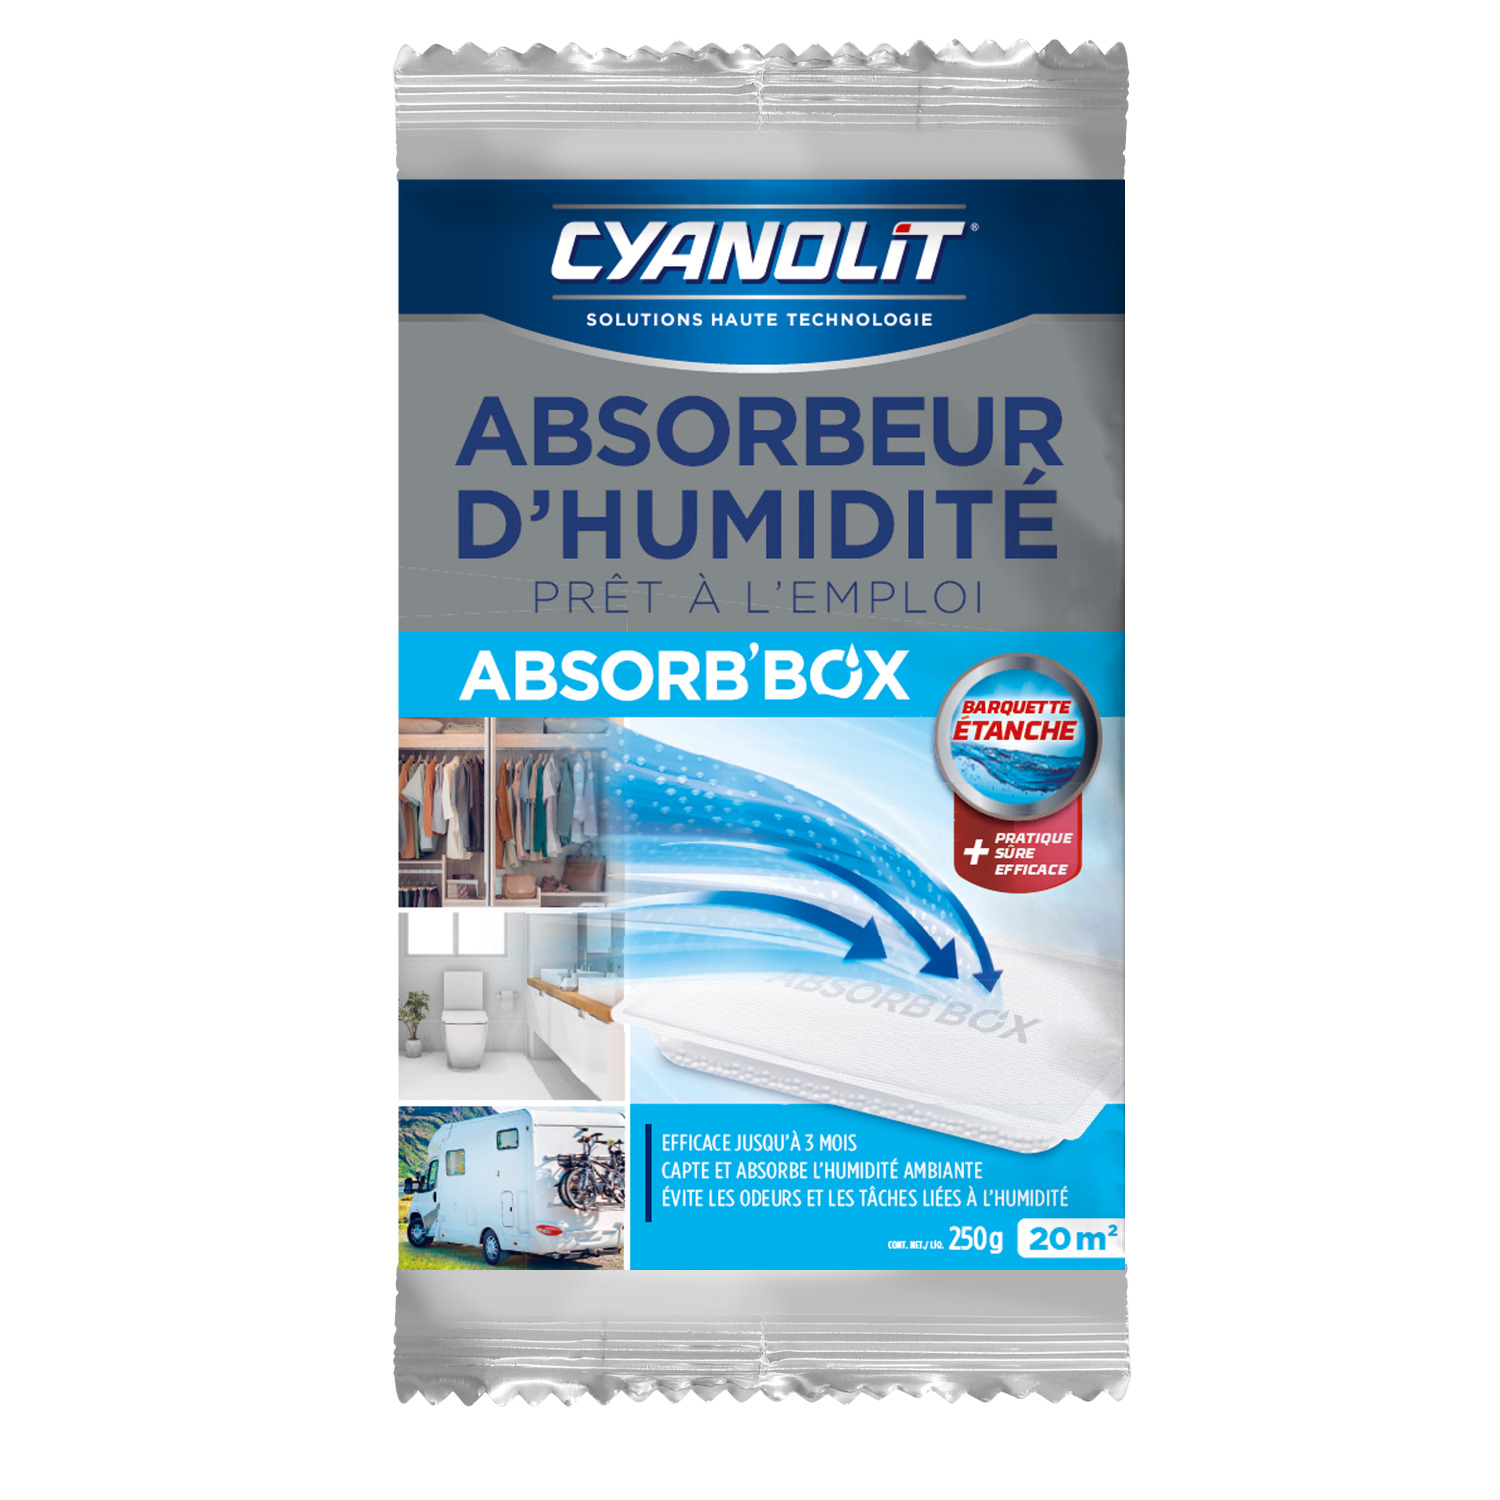 ABSORB'BOX - Absorbeur d'humidité